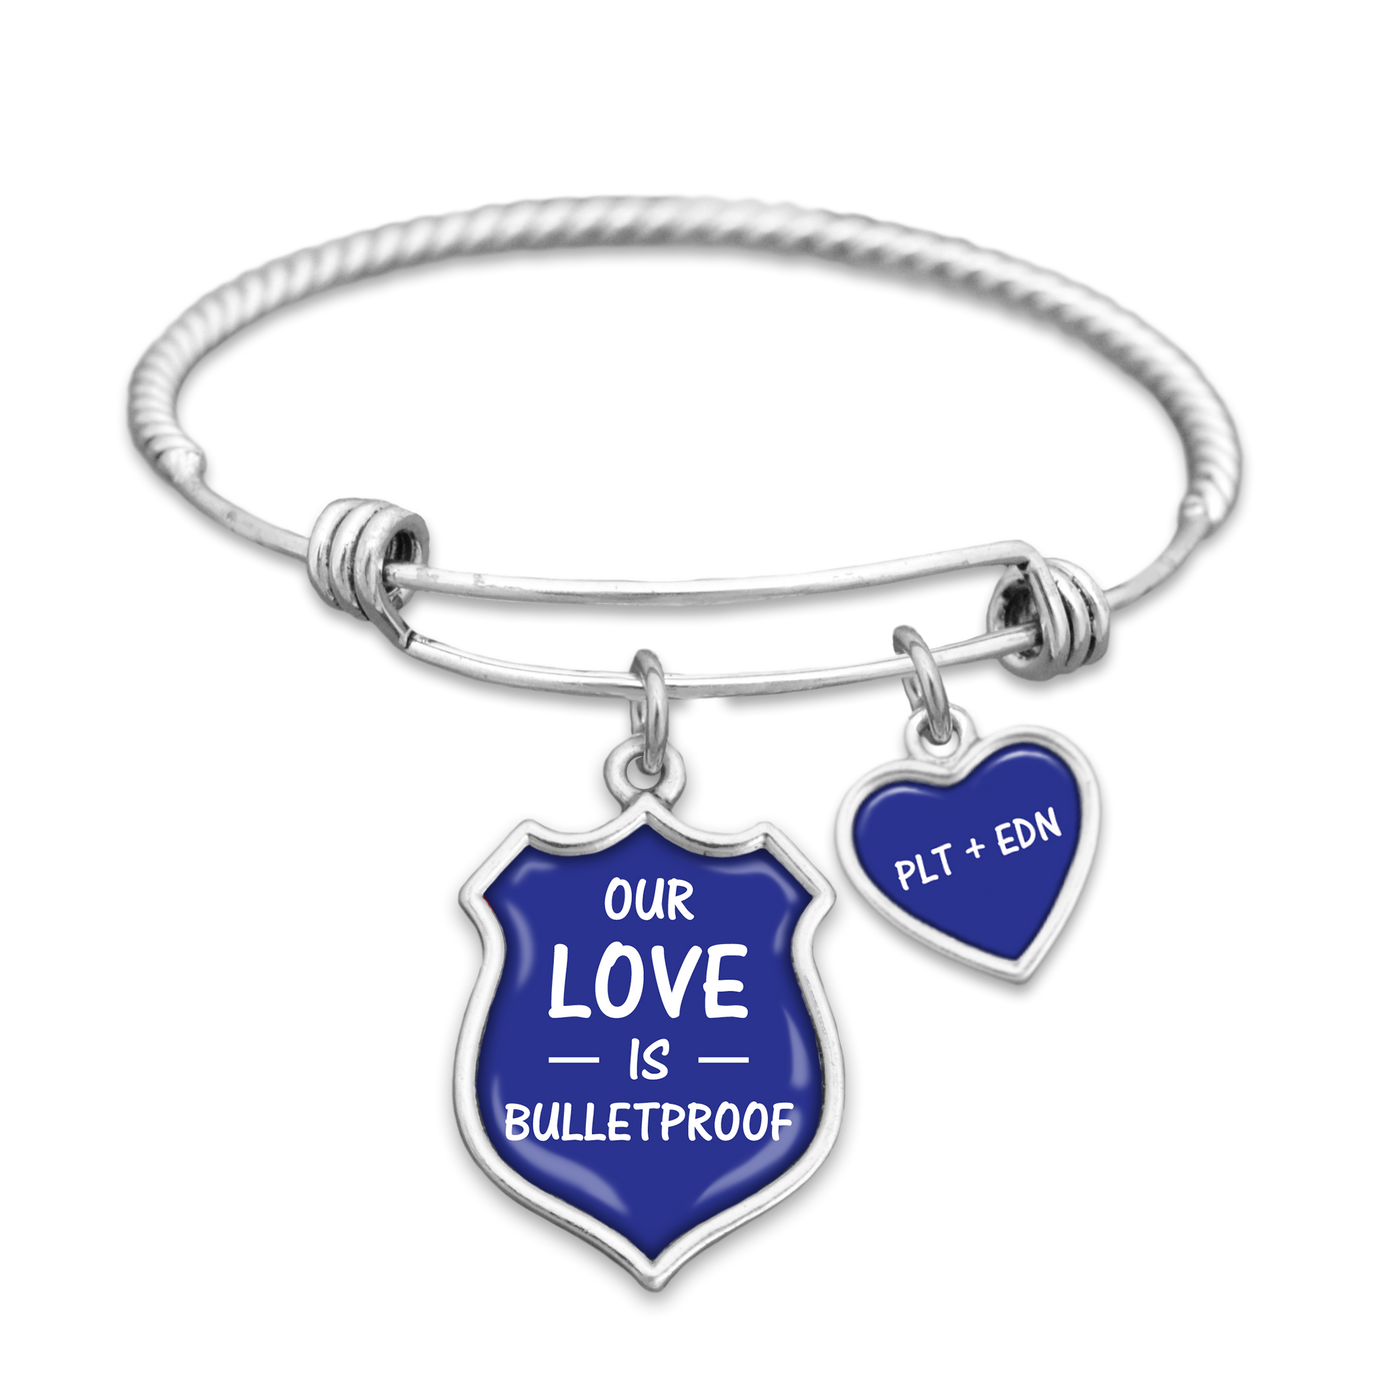 Our Love Is Bulletproof Customizable Initials Police Charm Bracelet